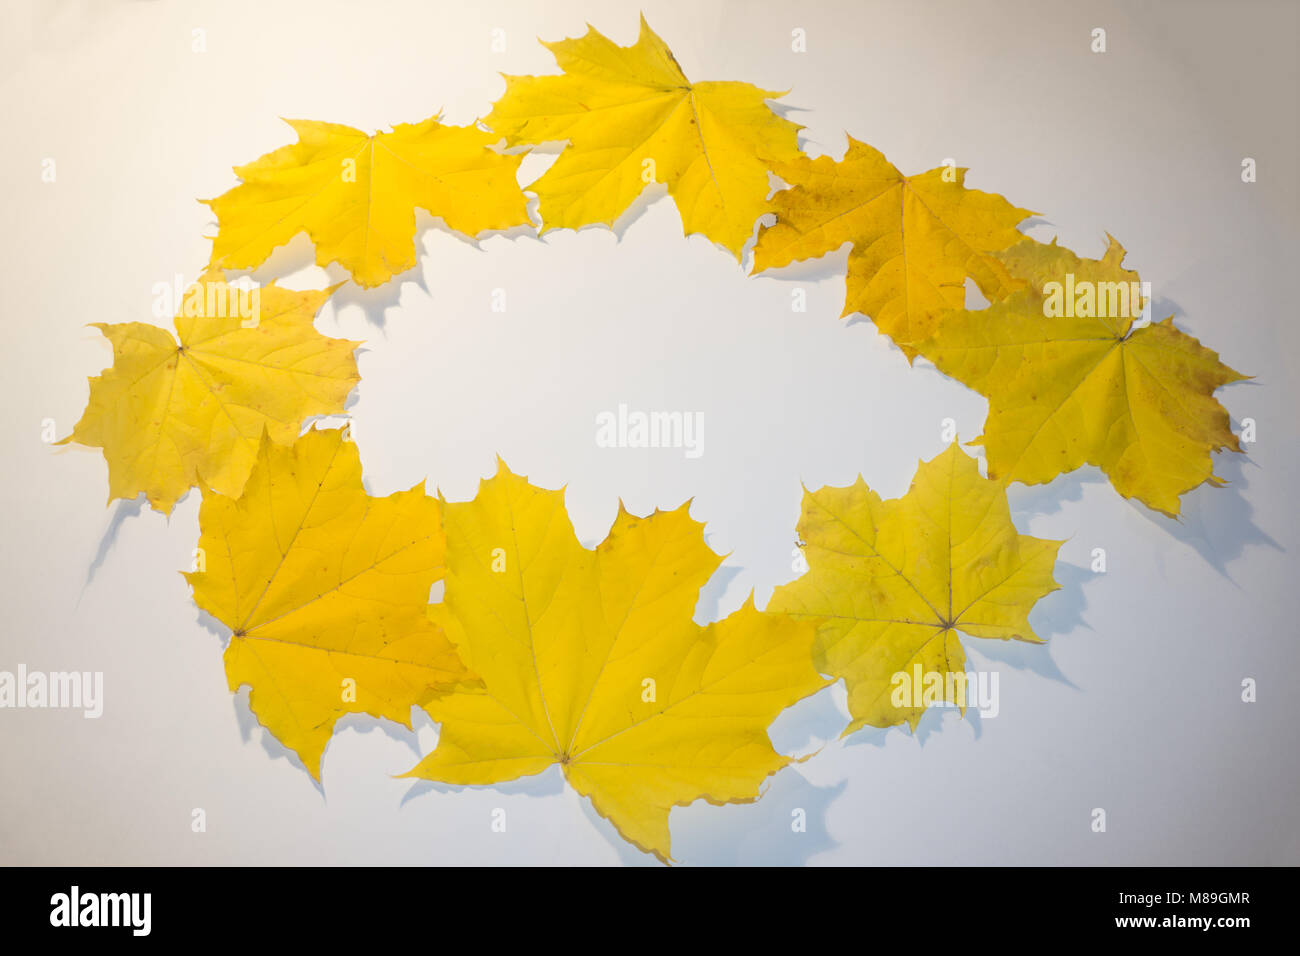 Empty white desktop with multicolored maple foliage frame around. Background with copy space, natural leaves decoration Stock Photo